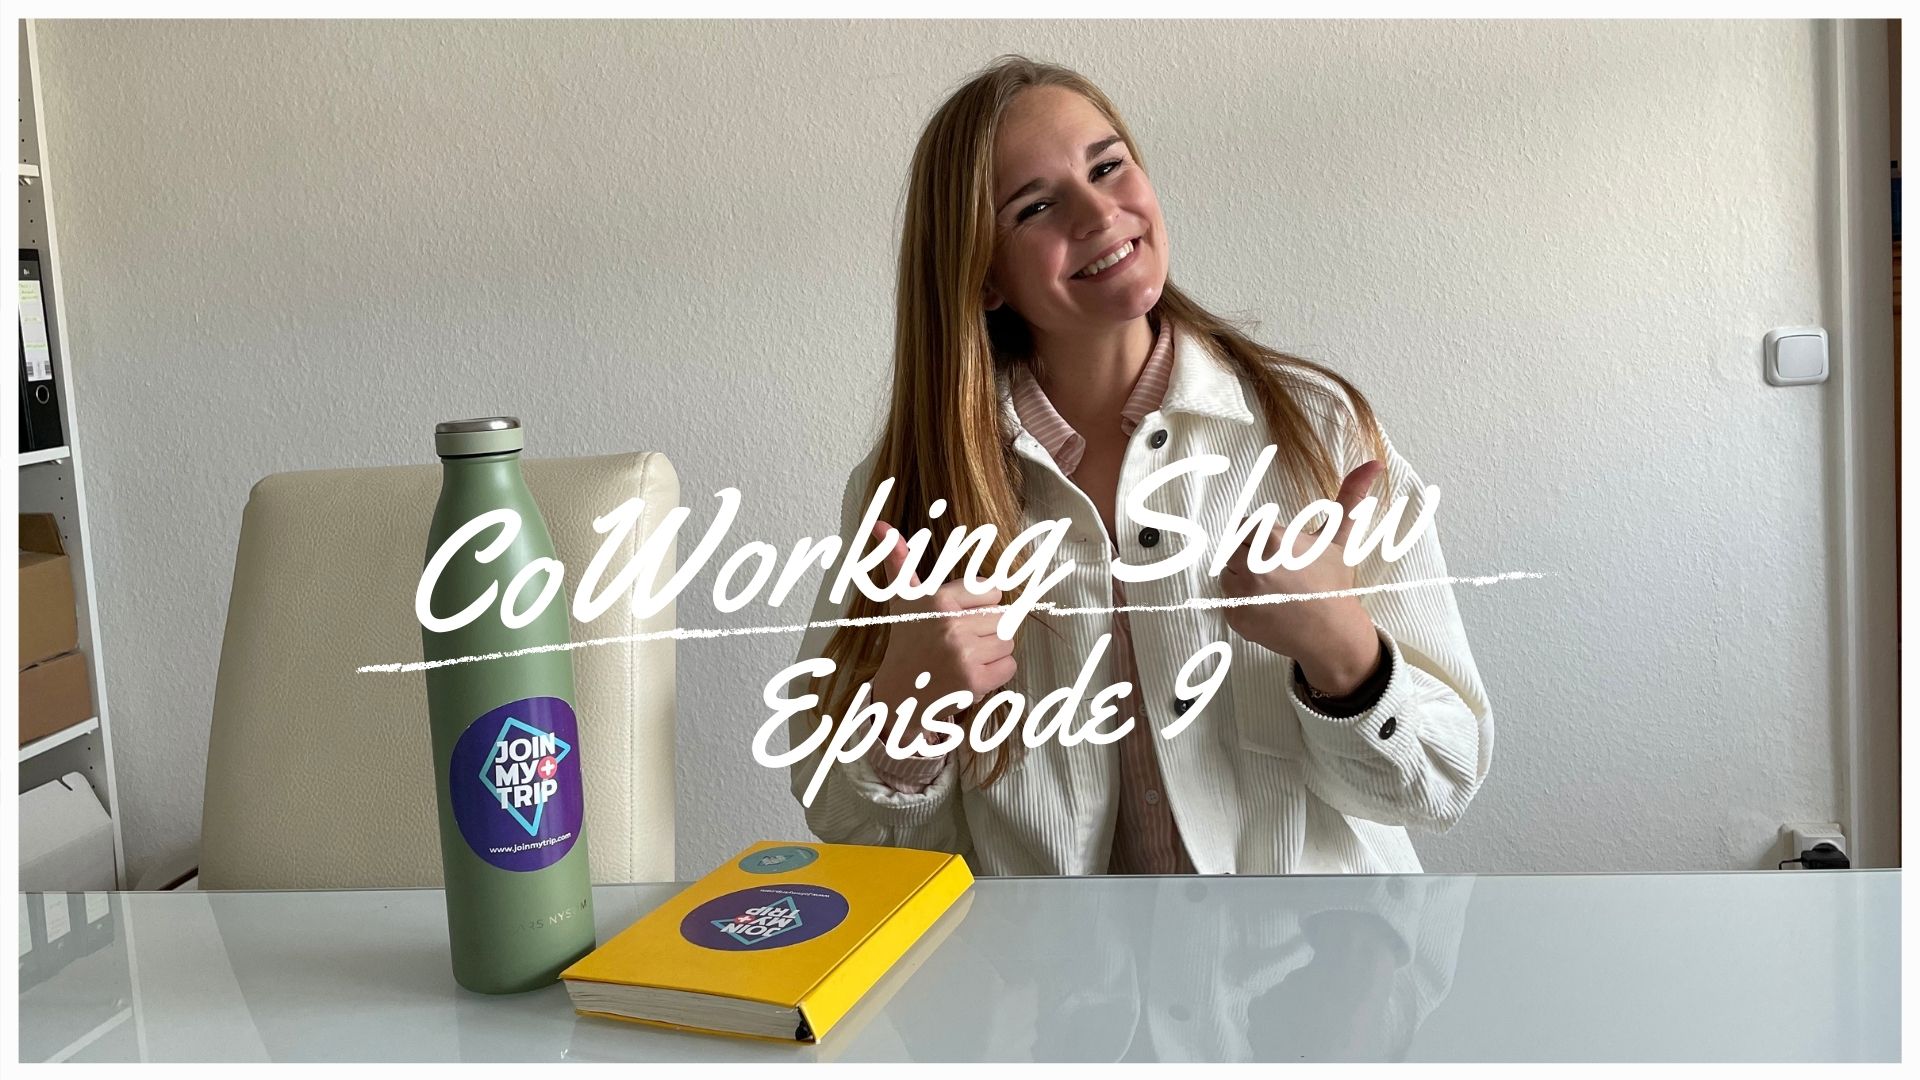 How To Manage A Group On A Remote Coworking Trip | CoWorking Show